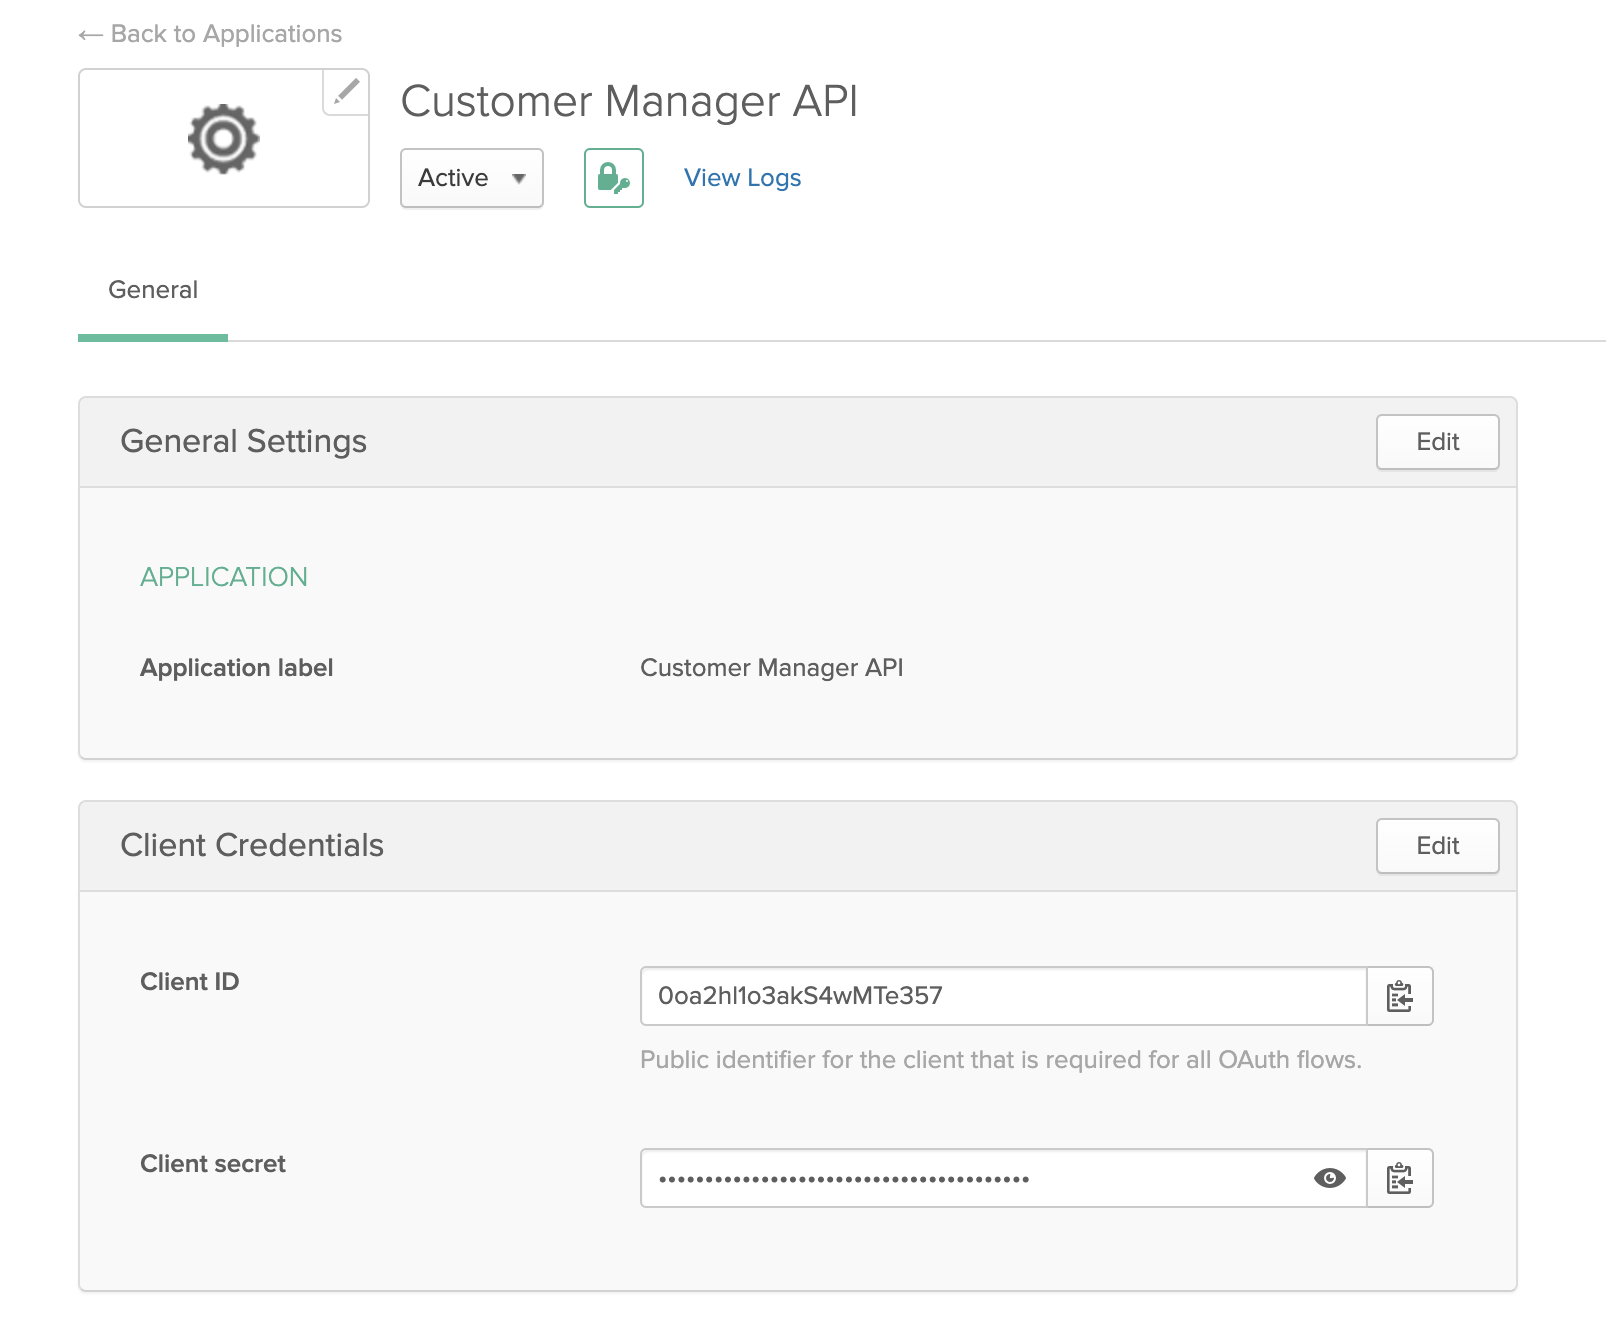 Customer manager API application with client ID and secret